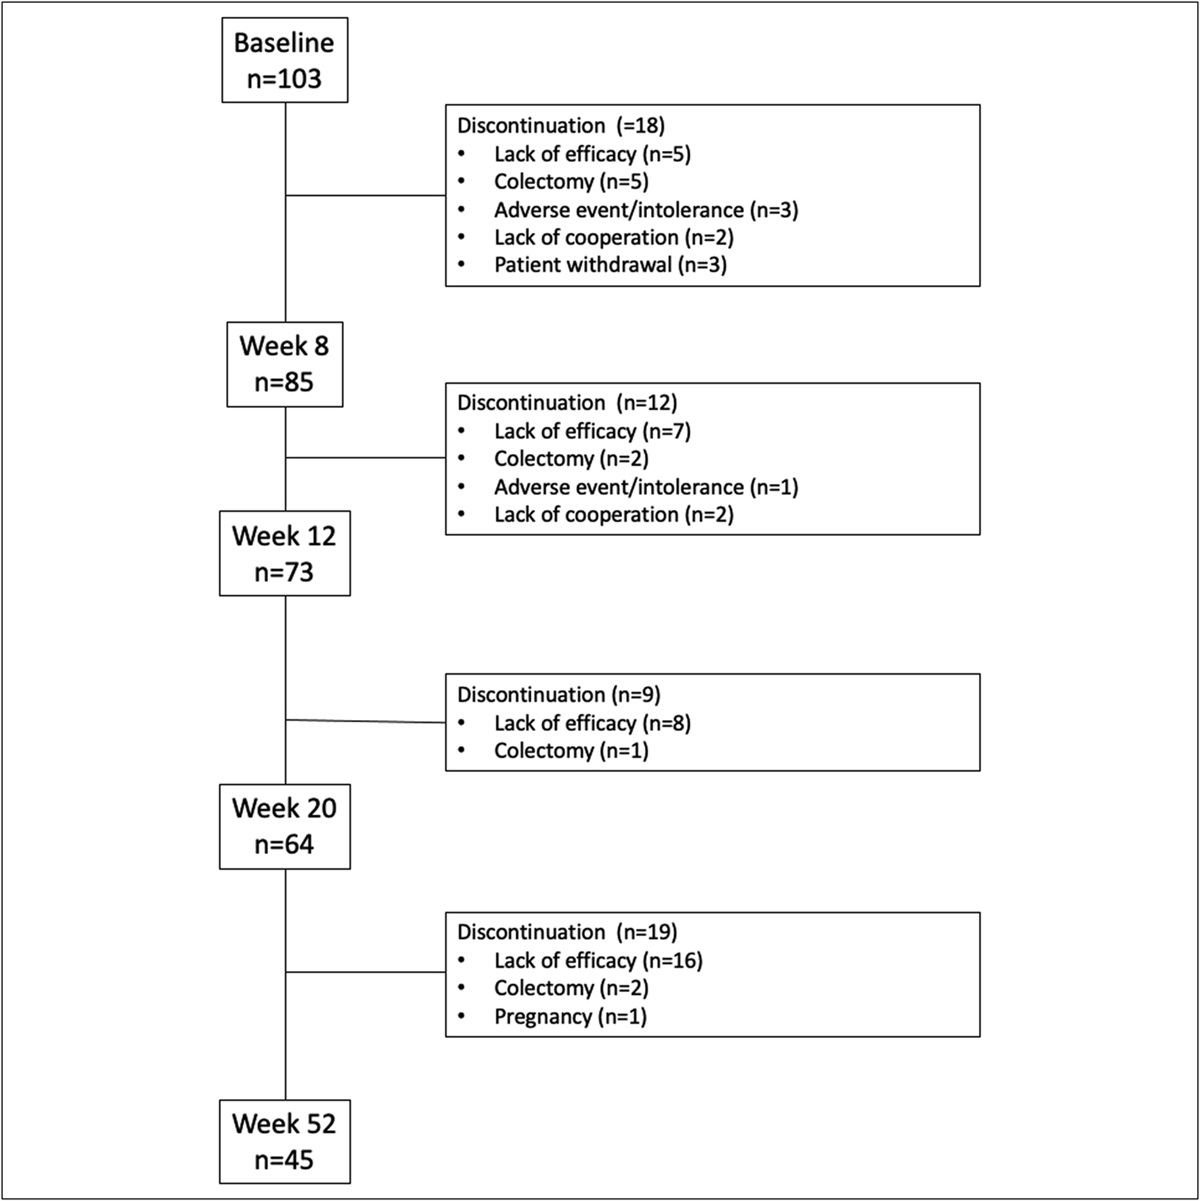 Clinical Long-Term Outcomes of Patient-Reported Outcomes in the Prospective Real-World Tofacitinib Response in Ulcerative Colitis Registry